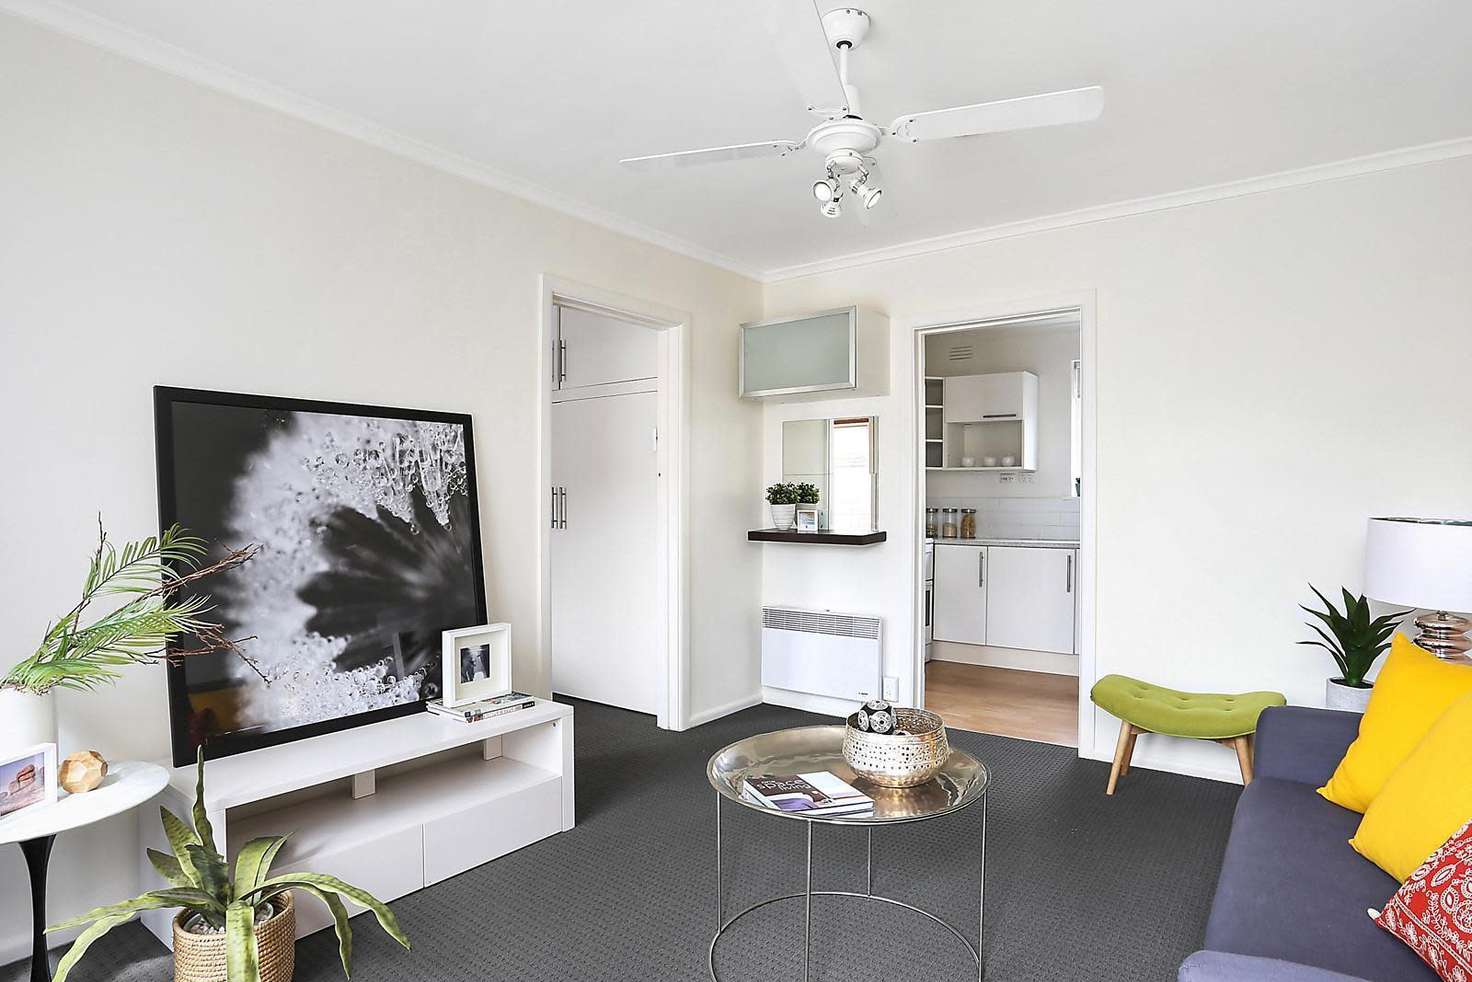 Main view of Homely apartment listing, 3/34 Bute Street, Murrumbeena VIC 3163